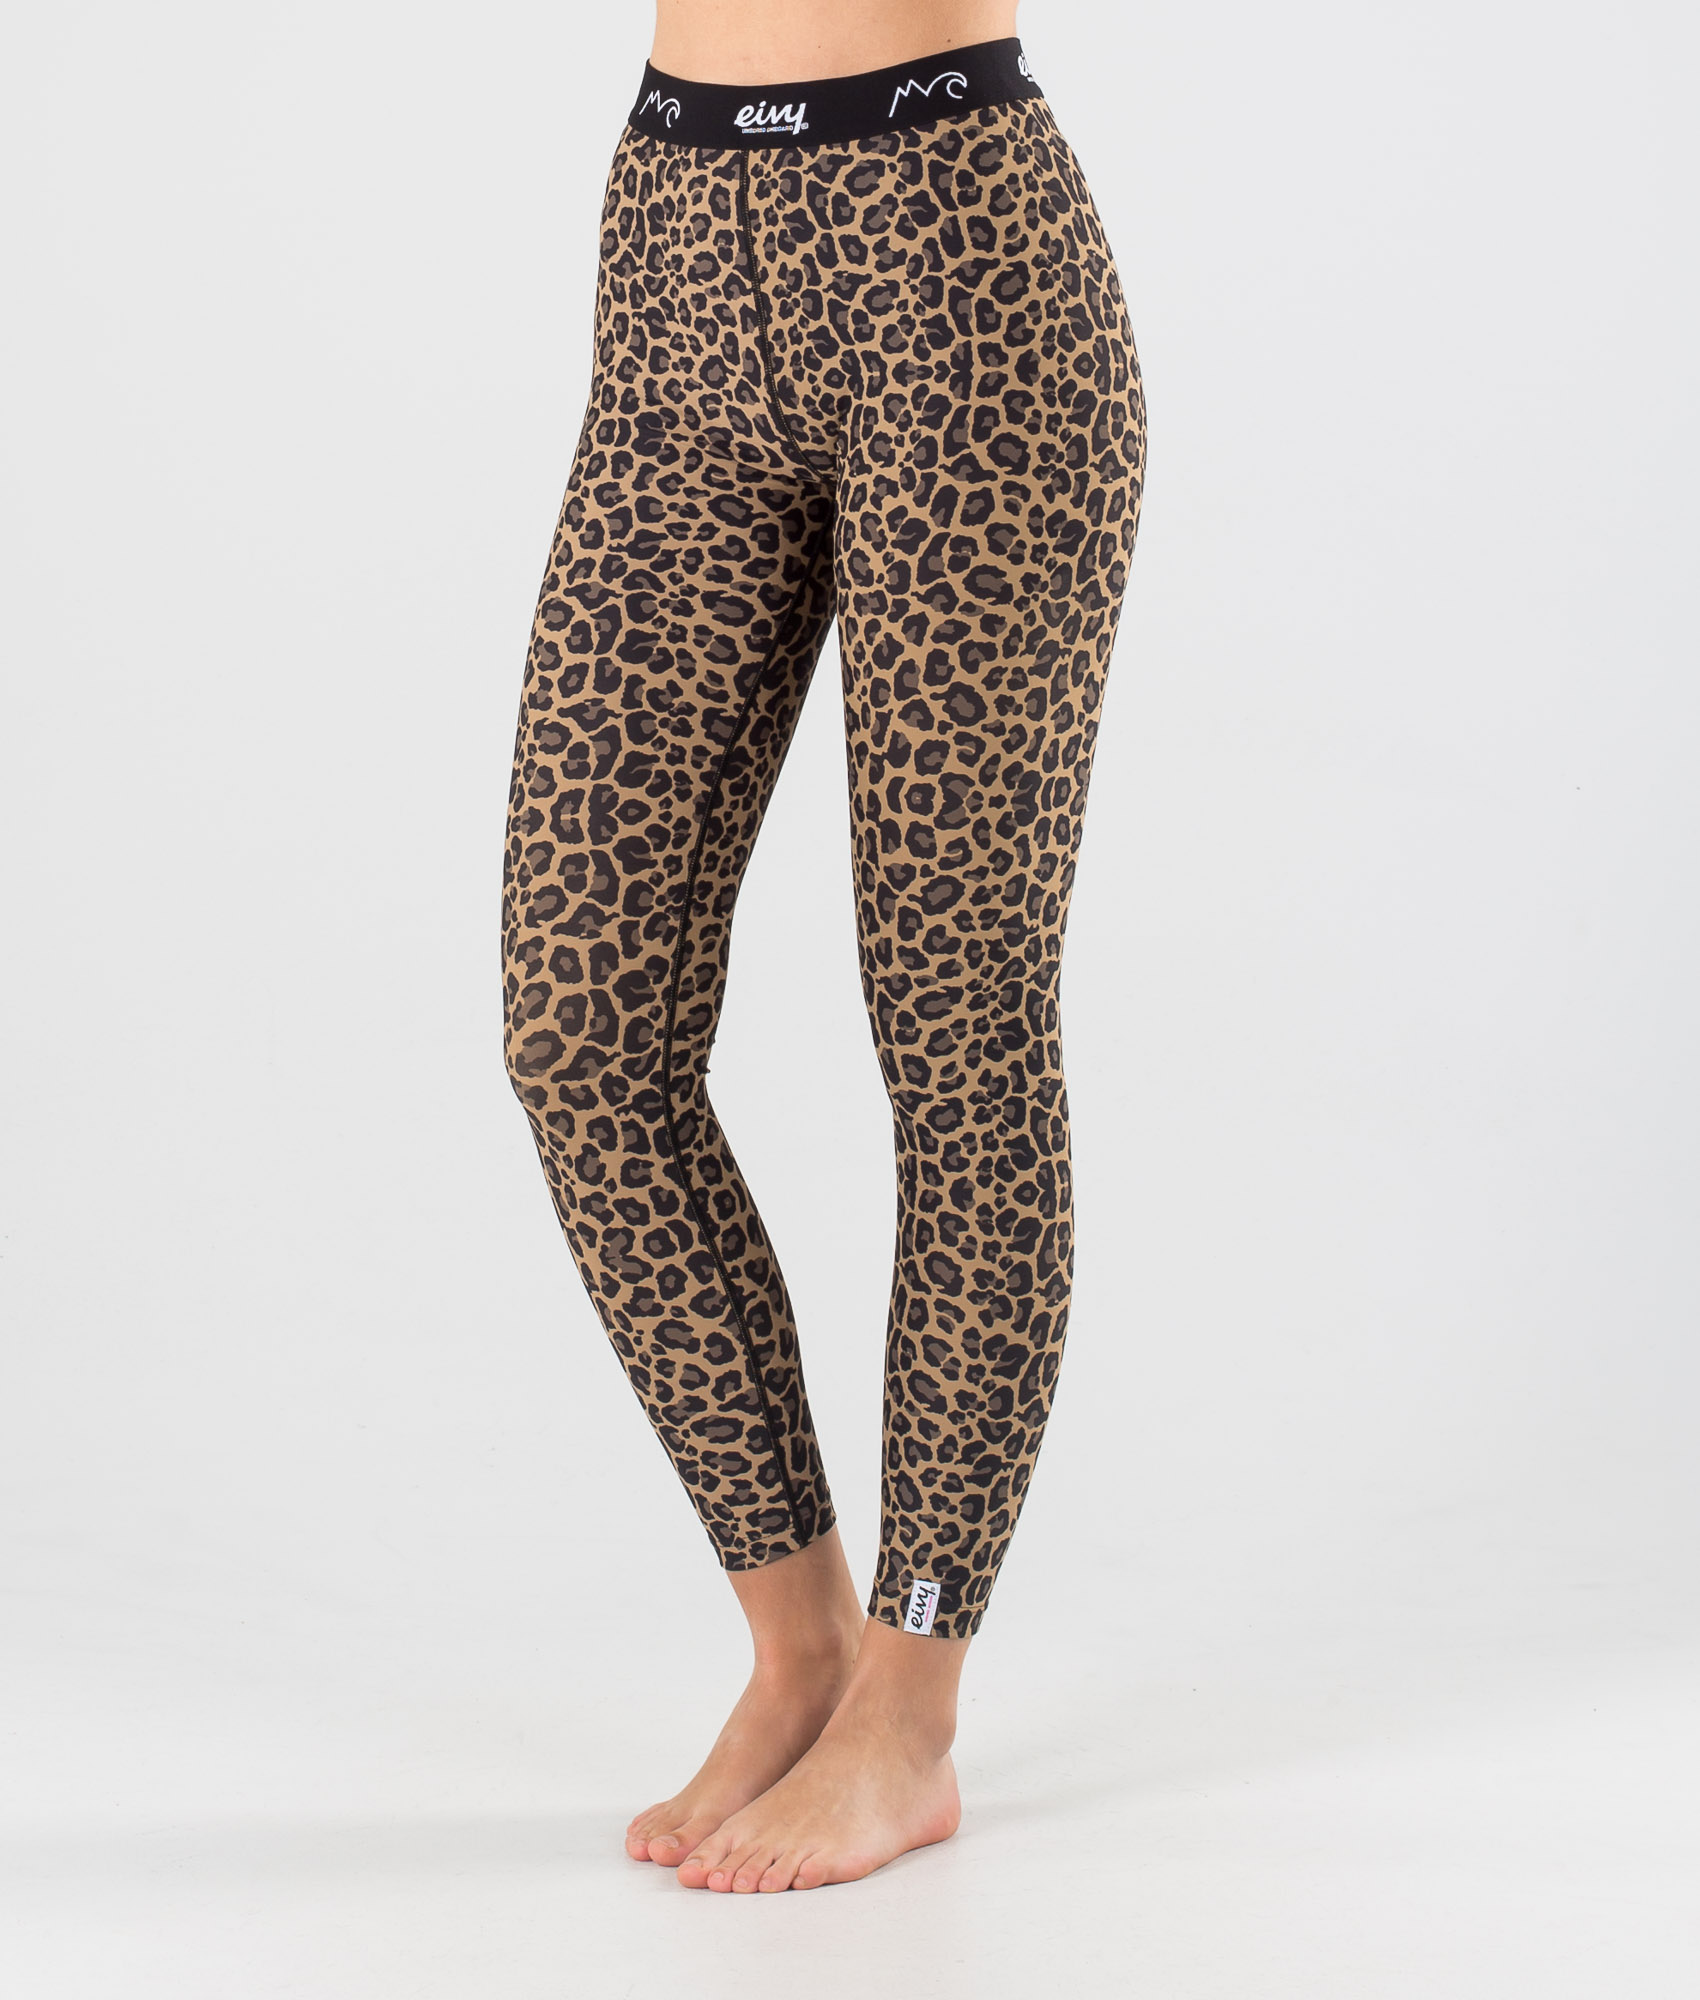 Eivy Women's Icecold Tights – Leopard - Free Style Sport